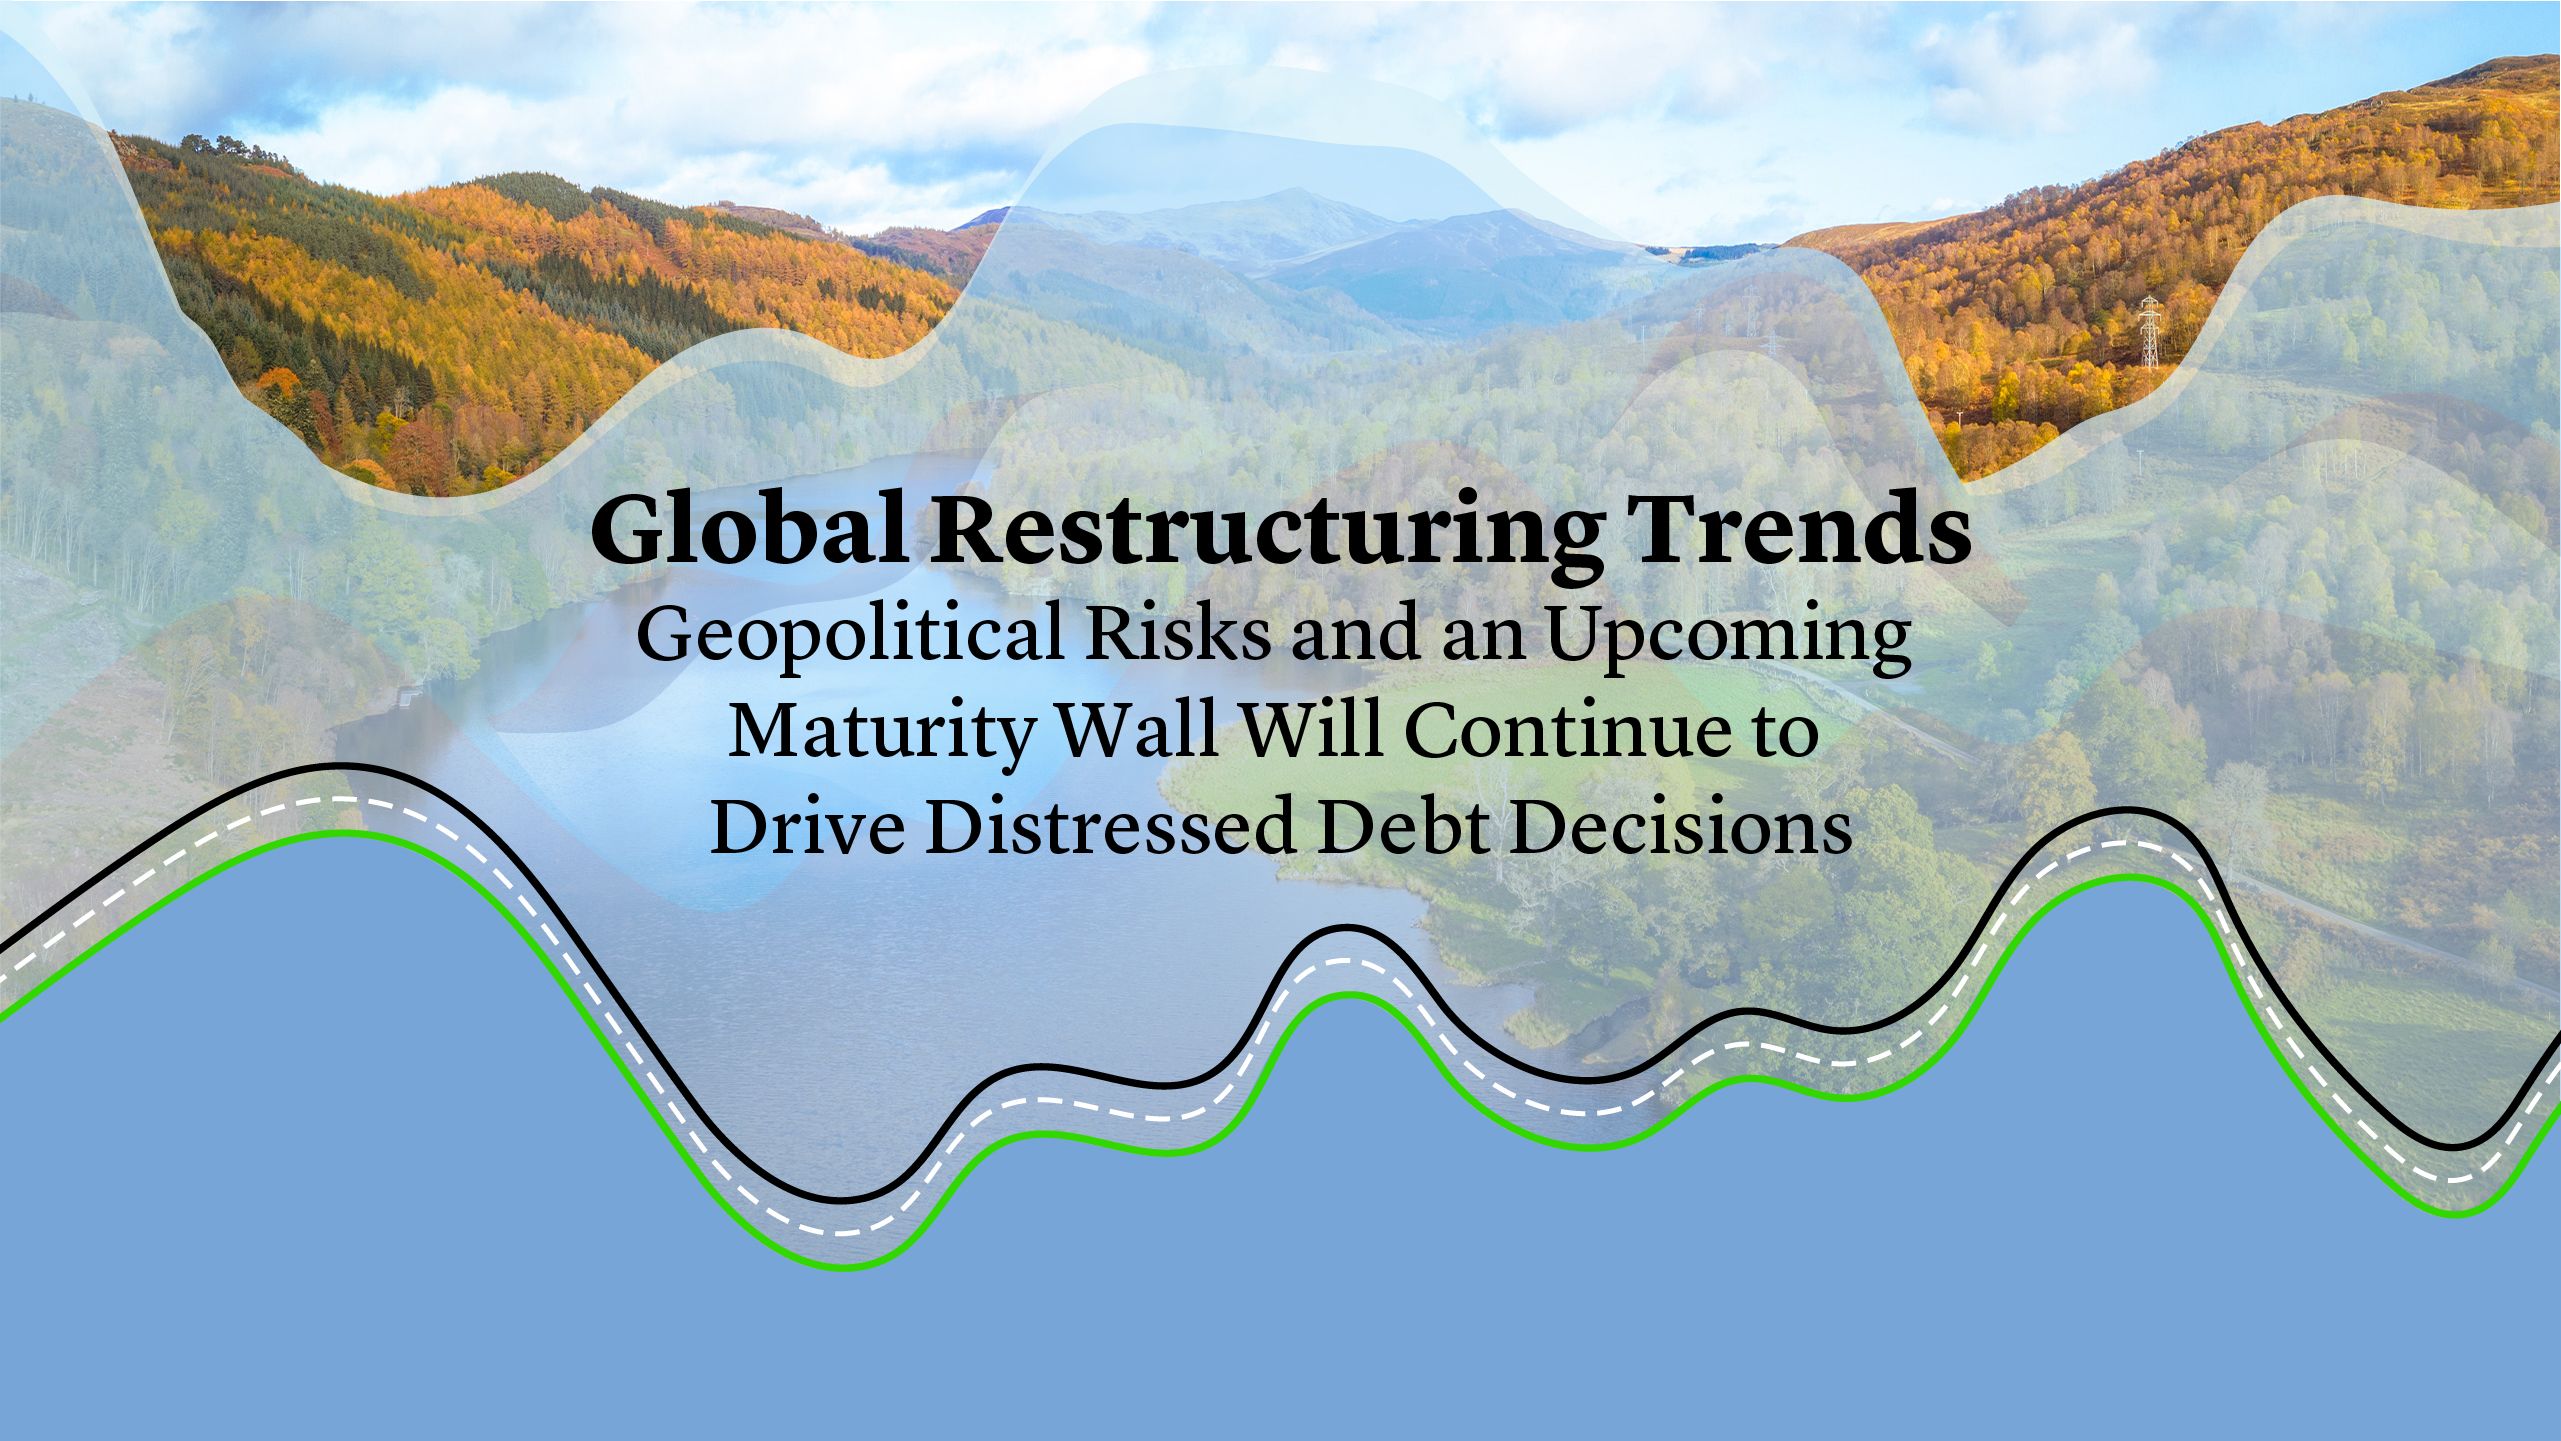 Global Restructuring Trends: Geopolitical Risks and an Upcoming Maturity Wall Will Continue to Drive Distressed Debt Decisions